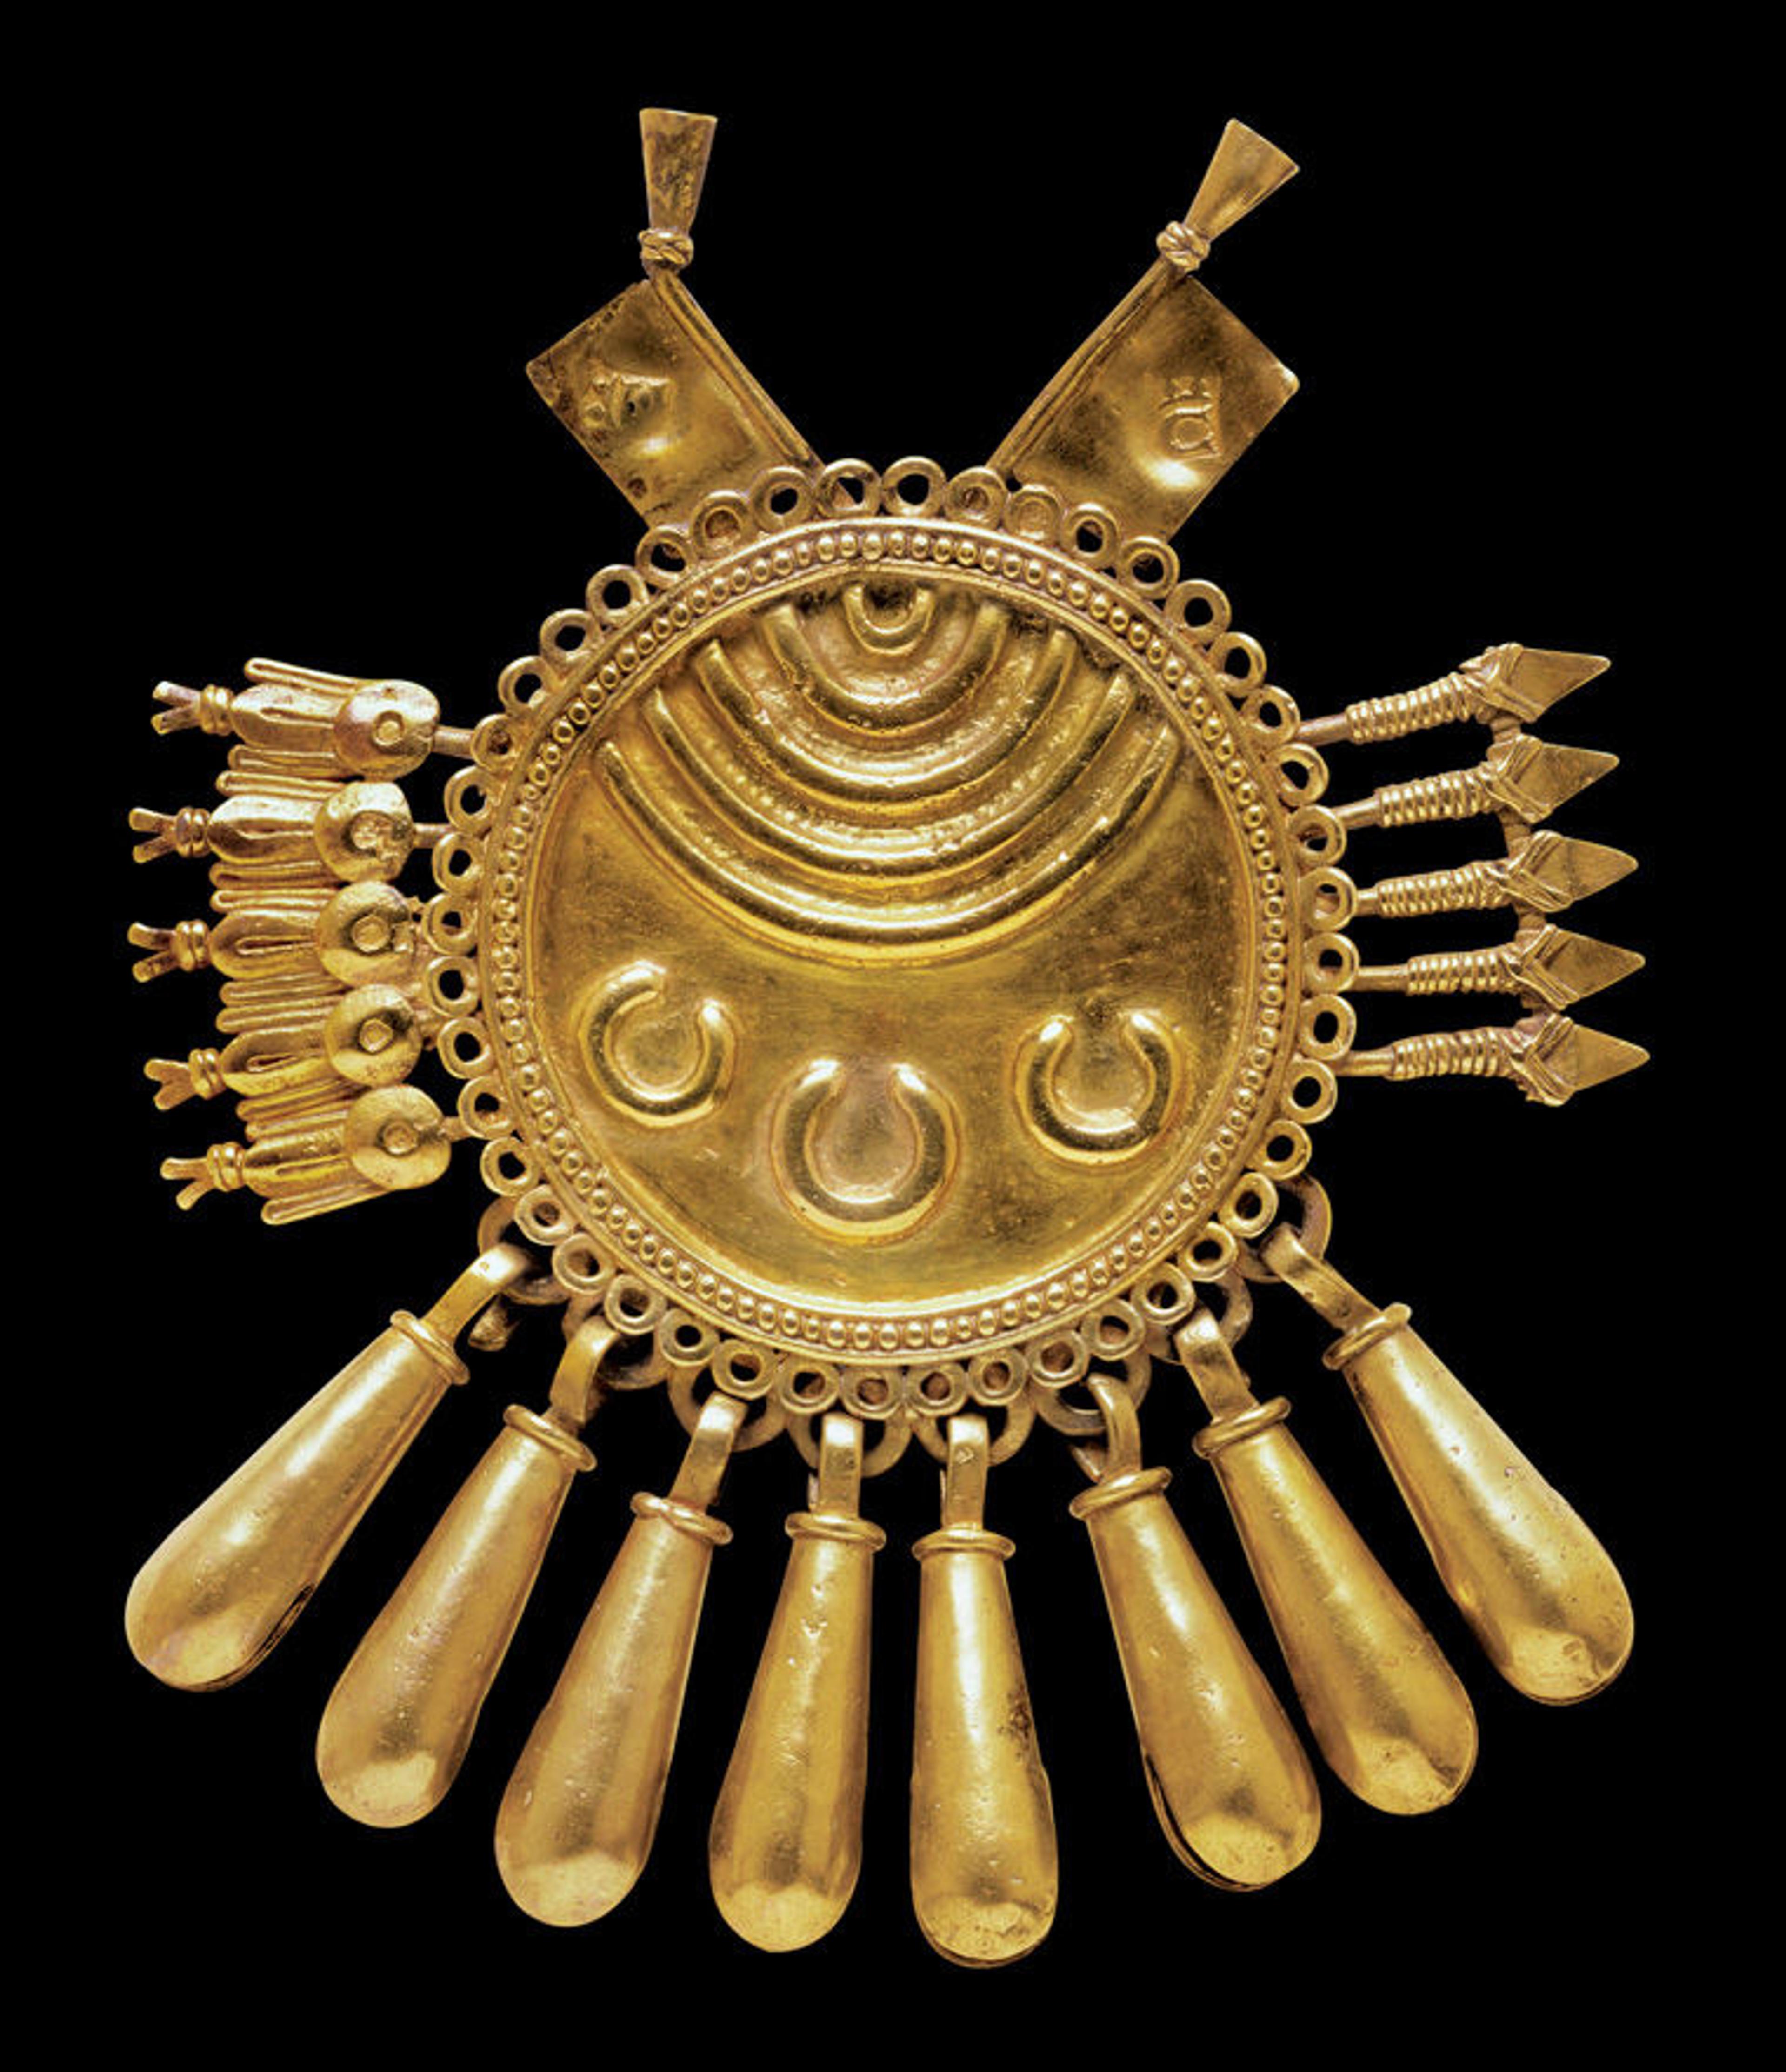 A gold shield pendant with various darts, produced in Mexico in the early sixteenth century